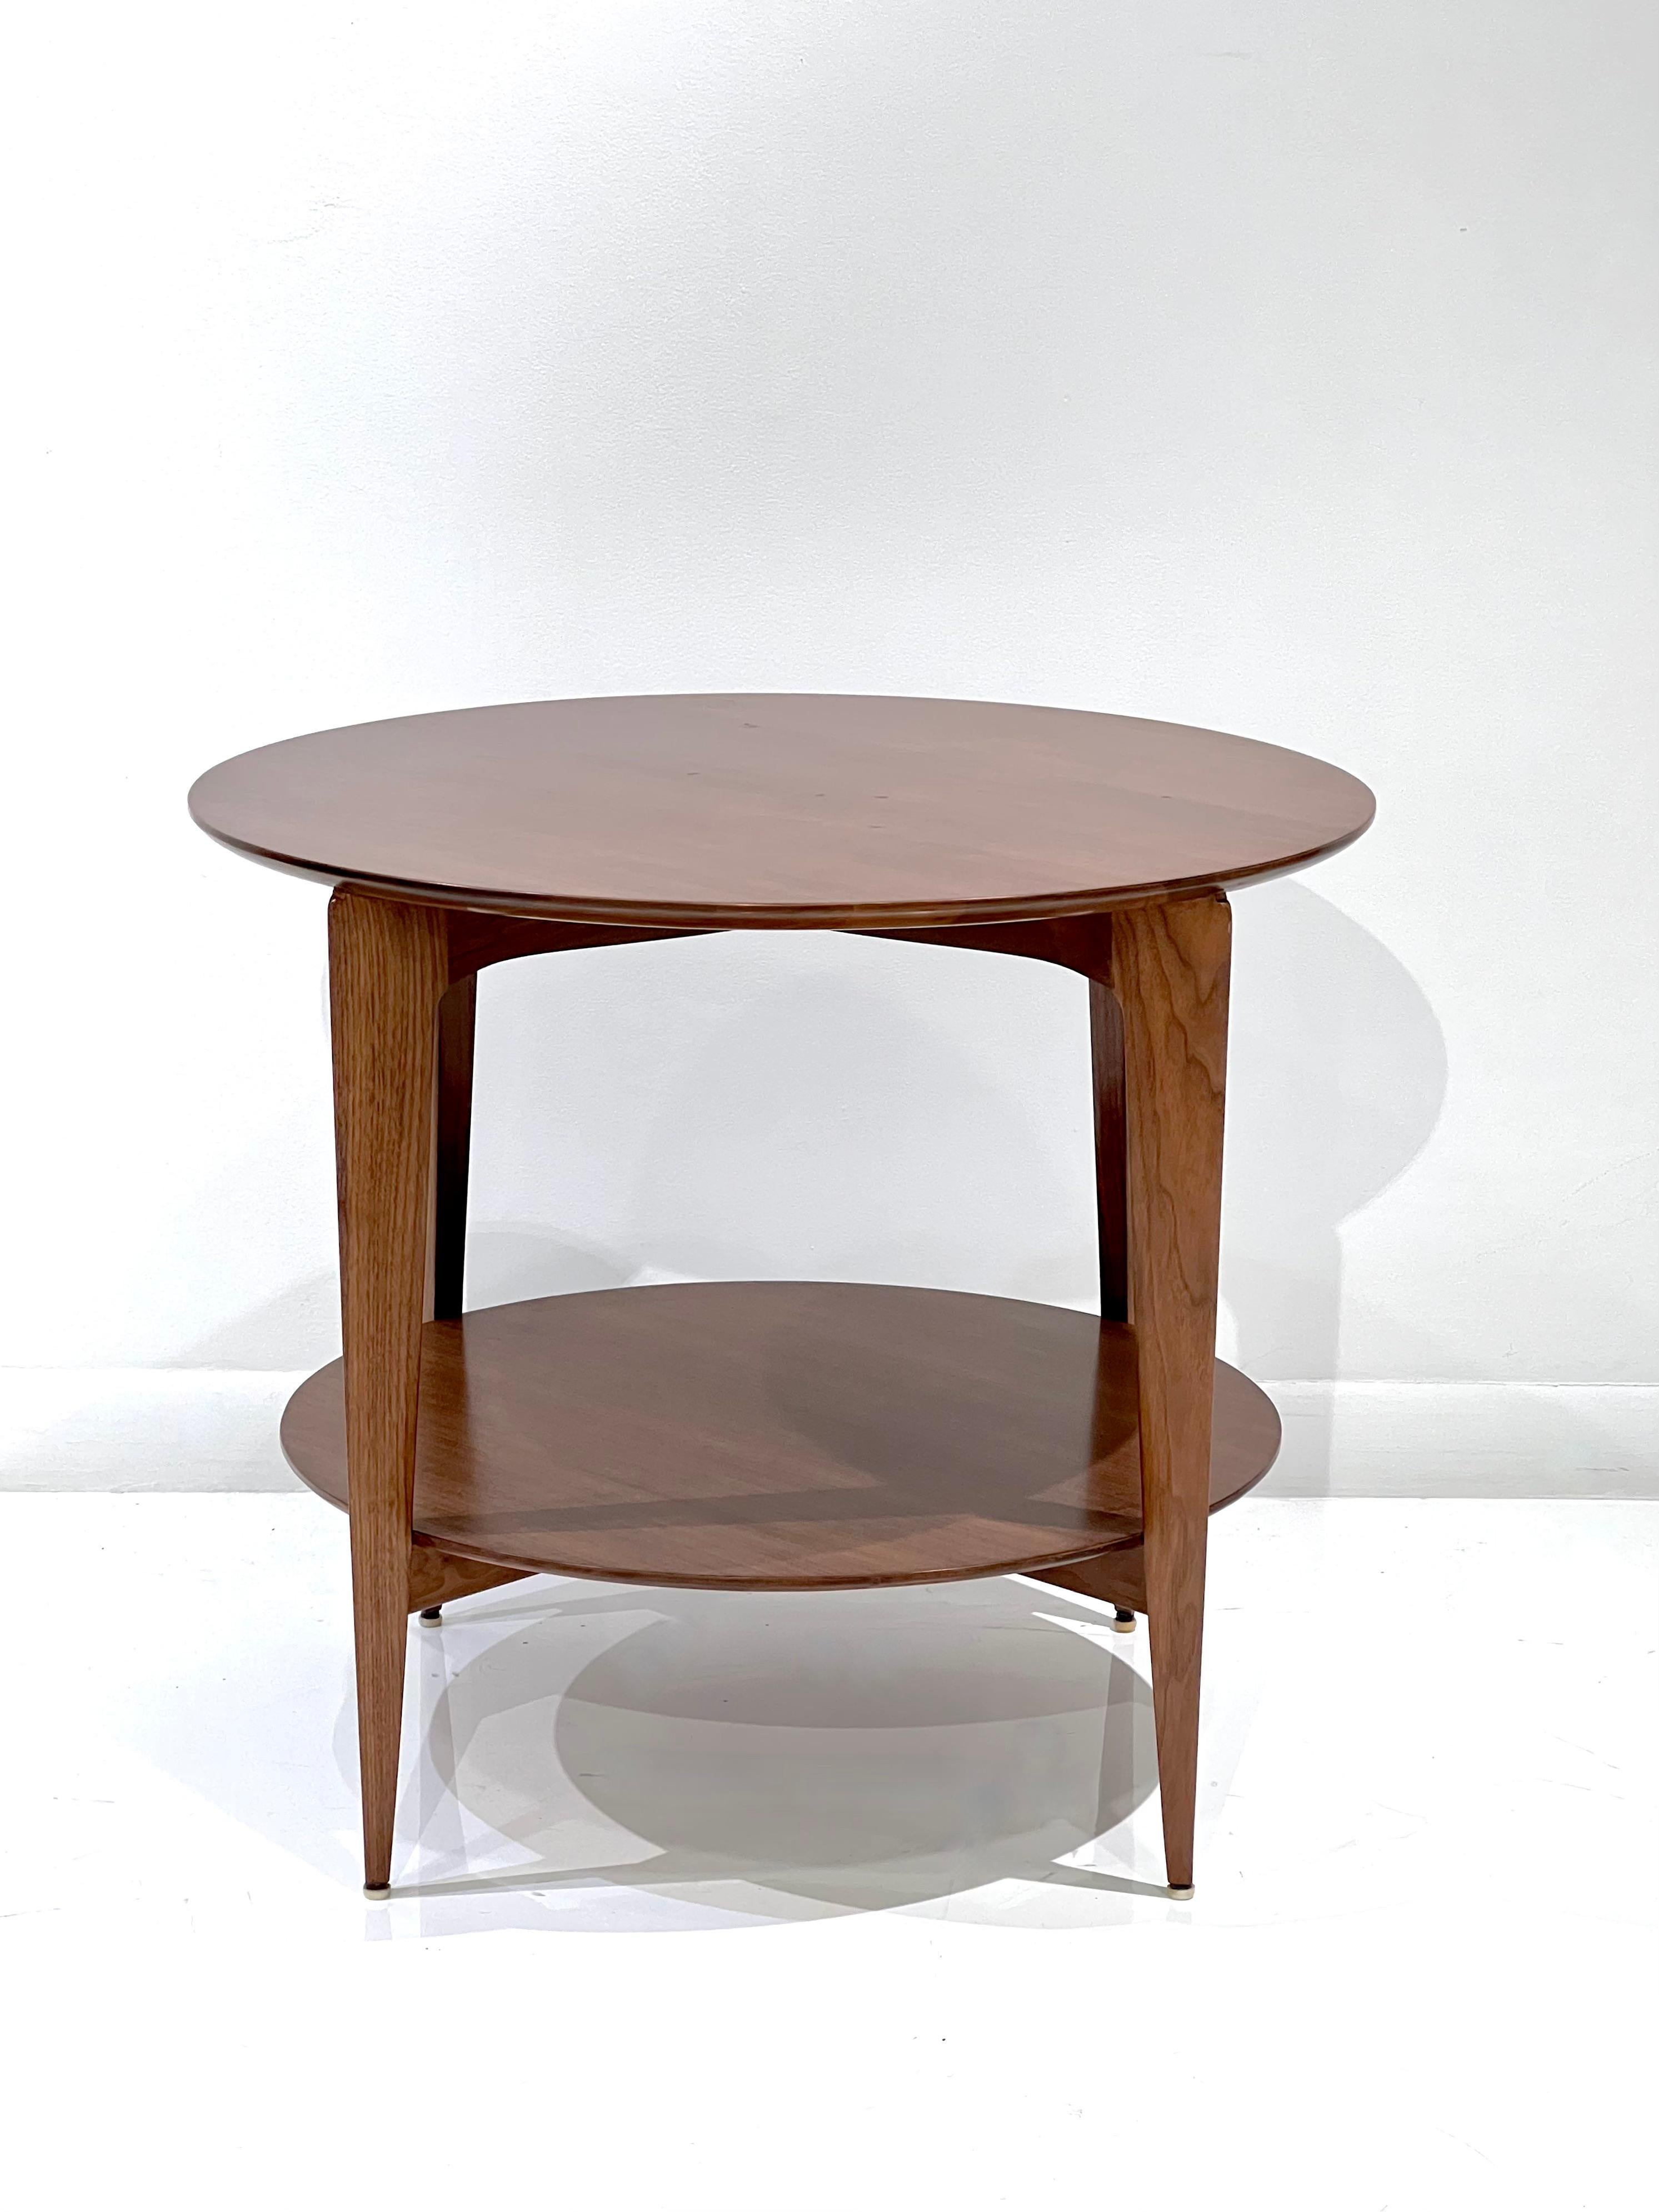 Occasional Two-Tiered table by Gio Ponti for Singer & Sons, made in Italy, 1950's. Beautifully refinished in a rich medium brown walnut.